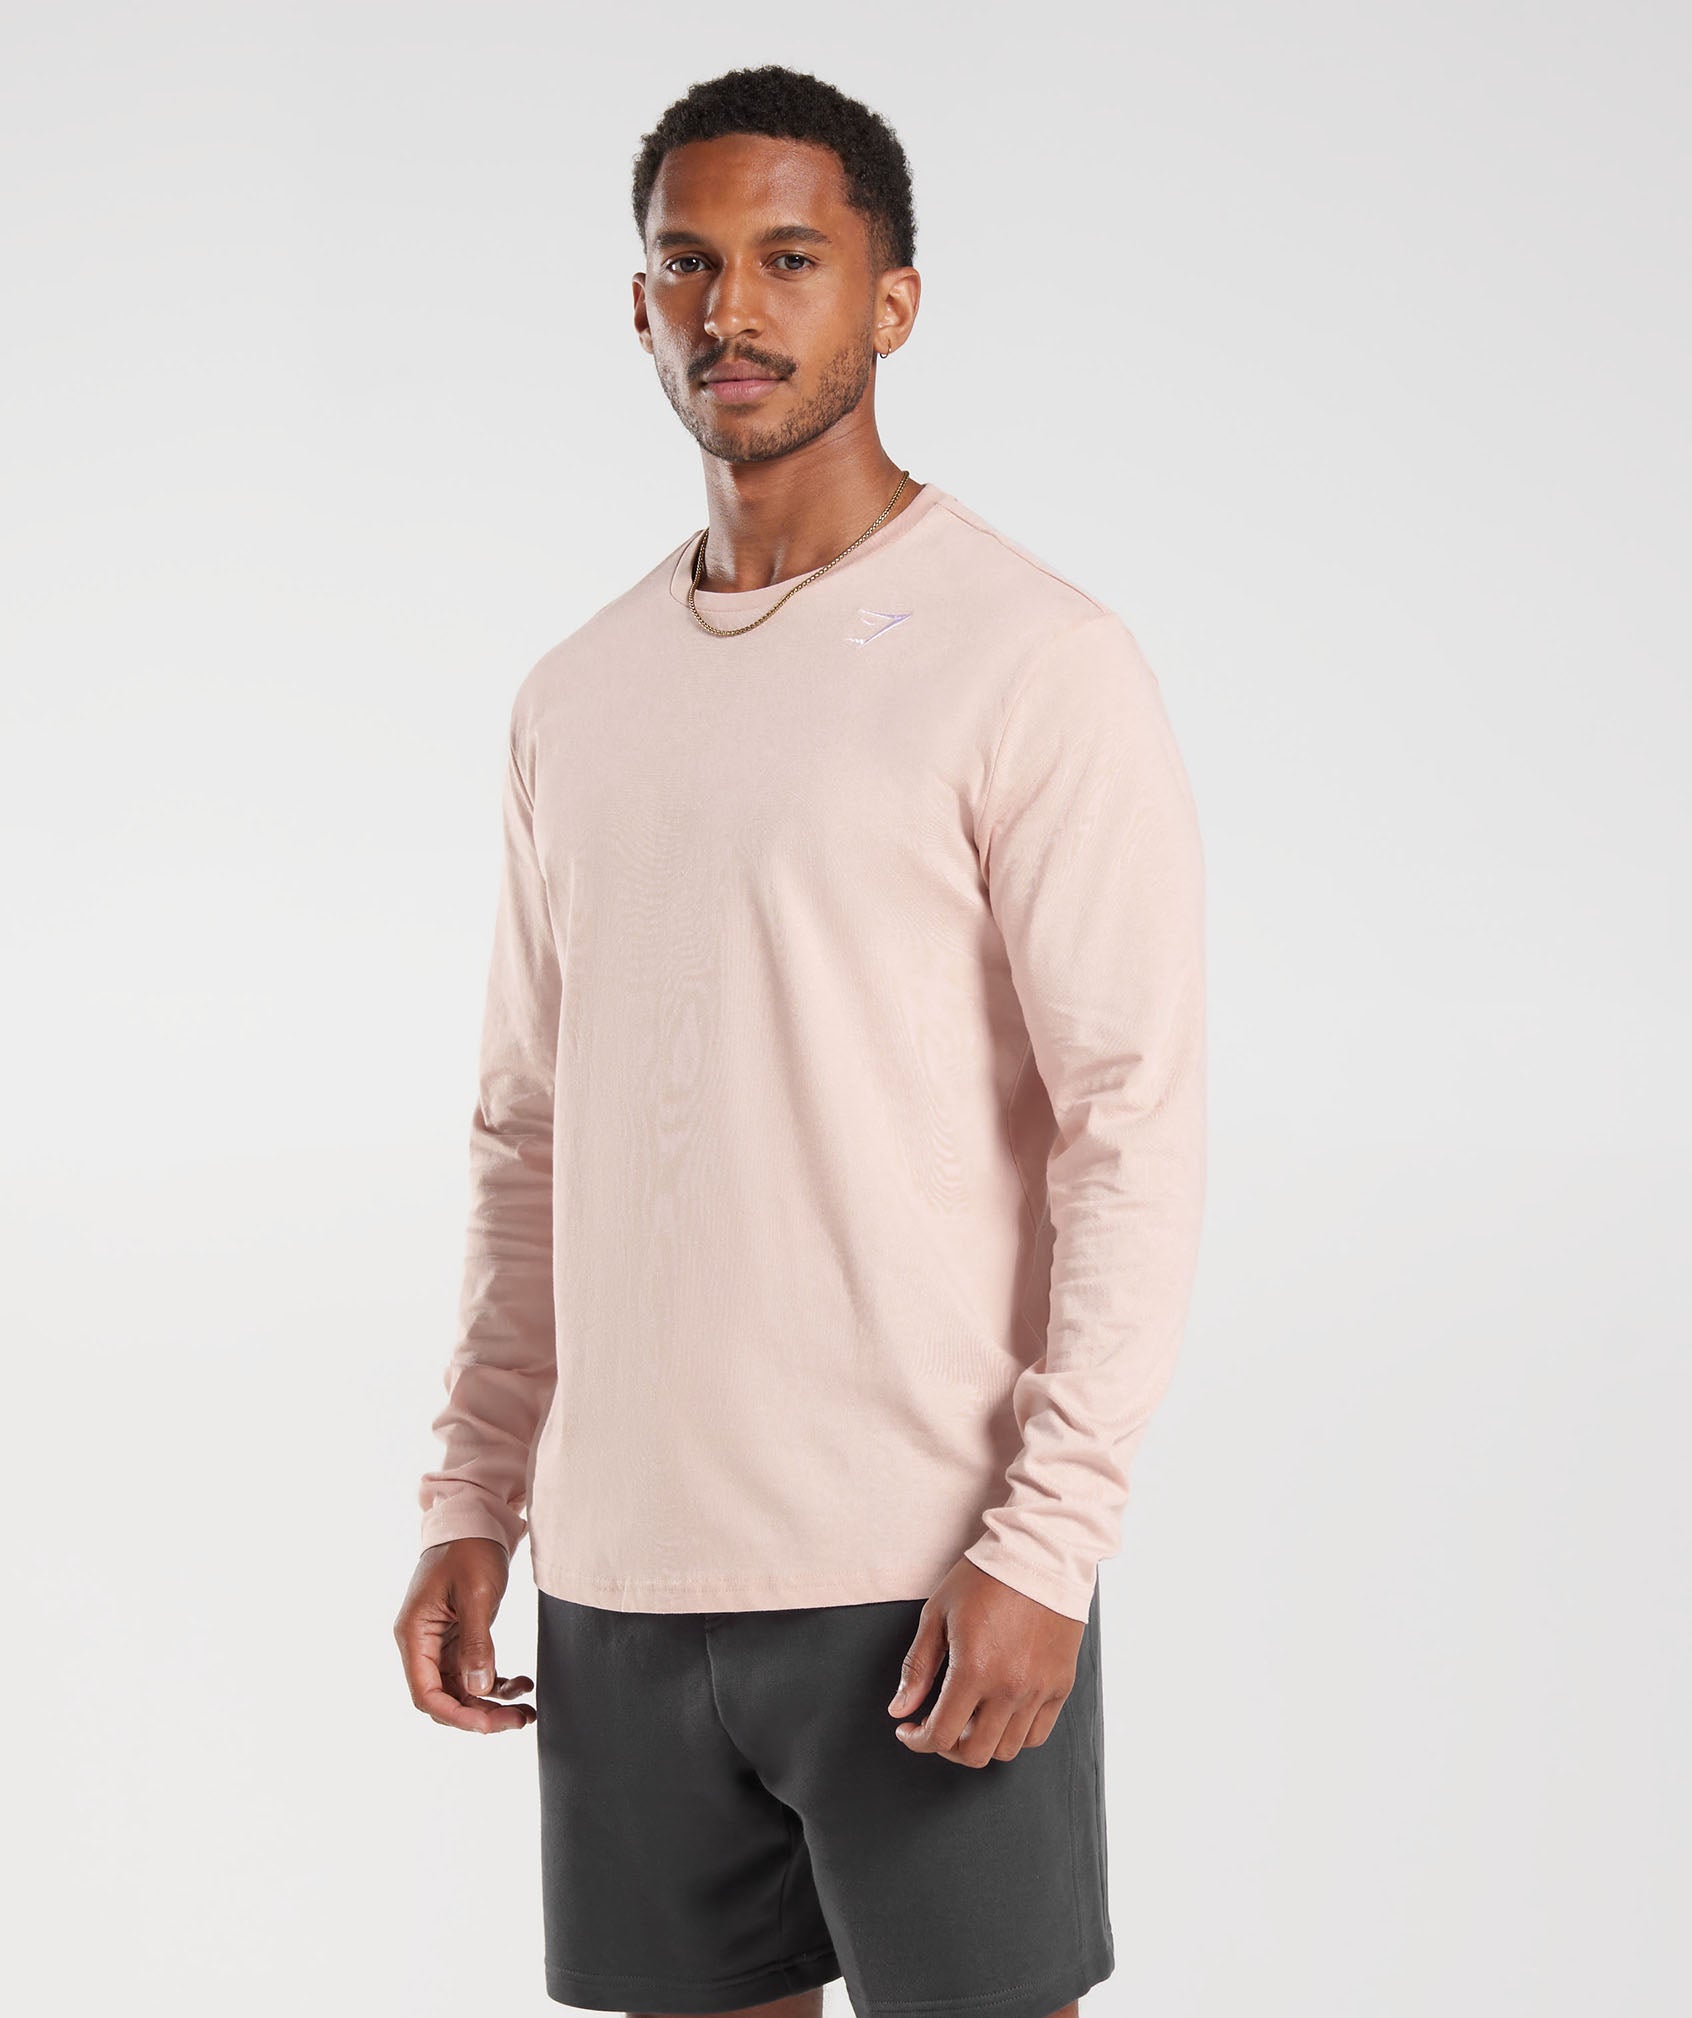 Crest Long Sleeve T-Shirt in Misty Pink - view 3